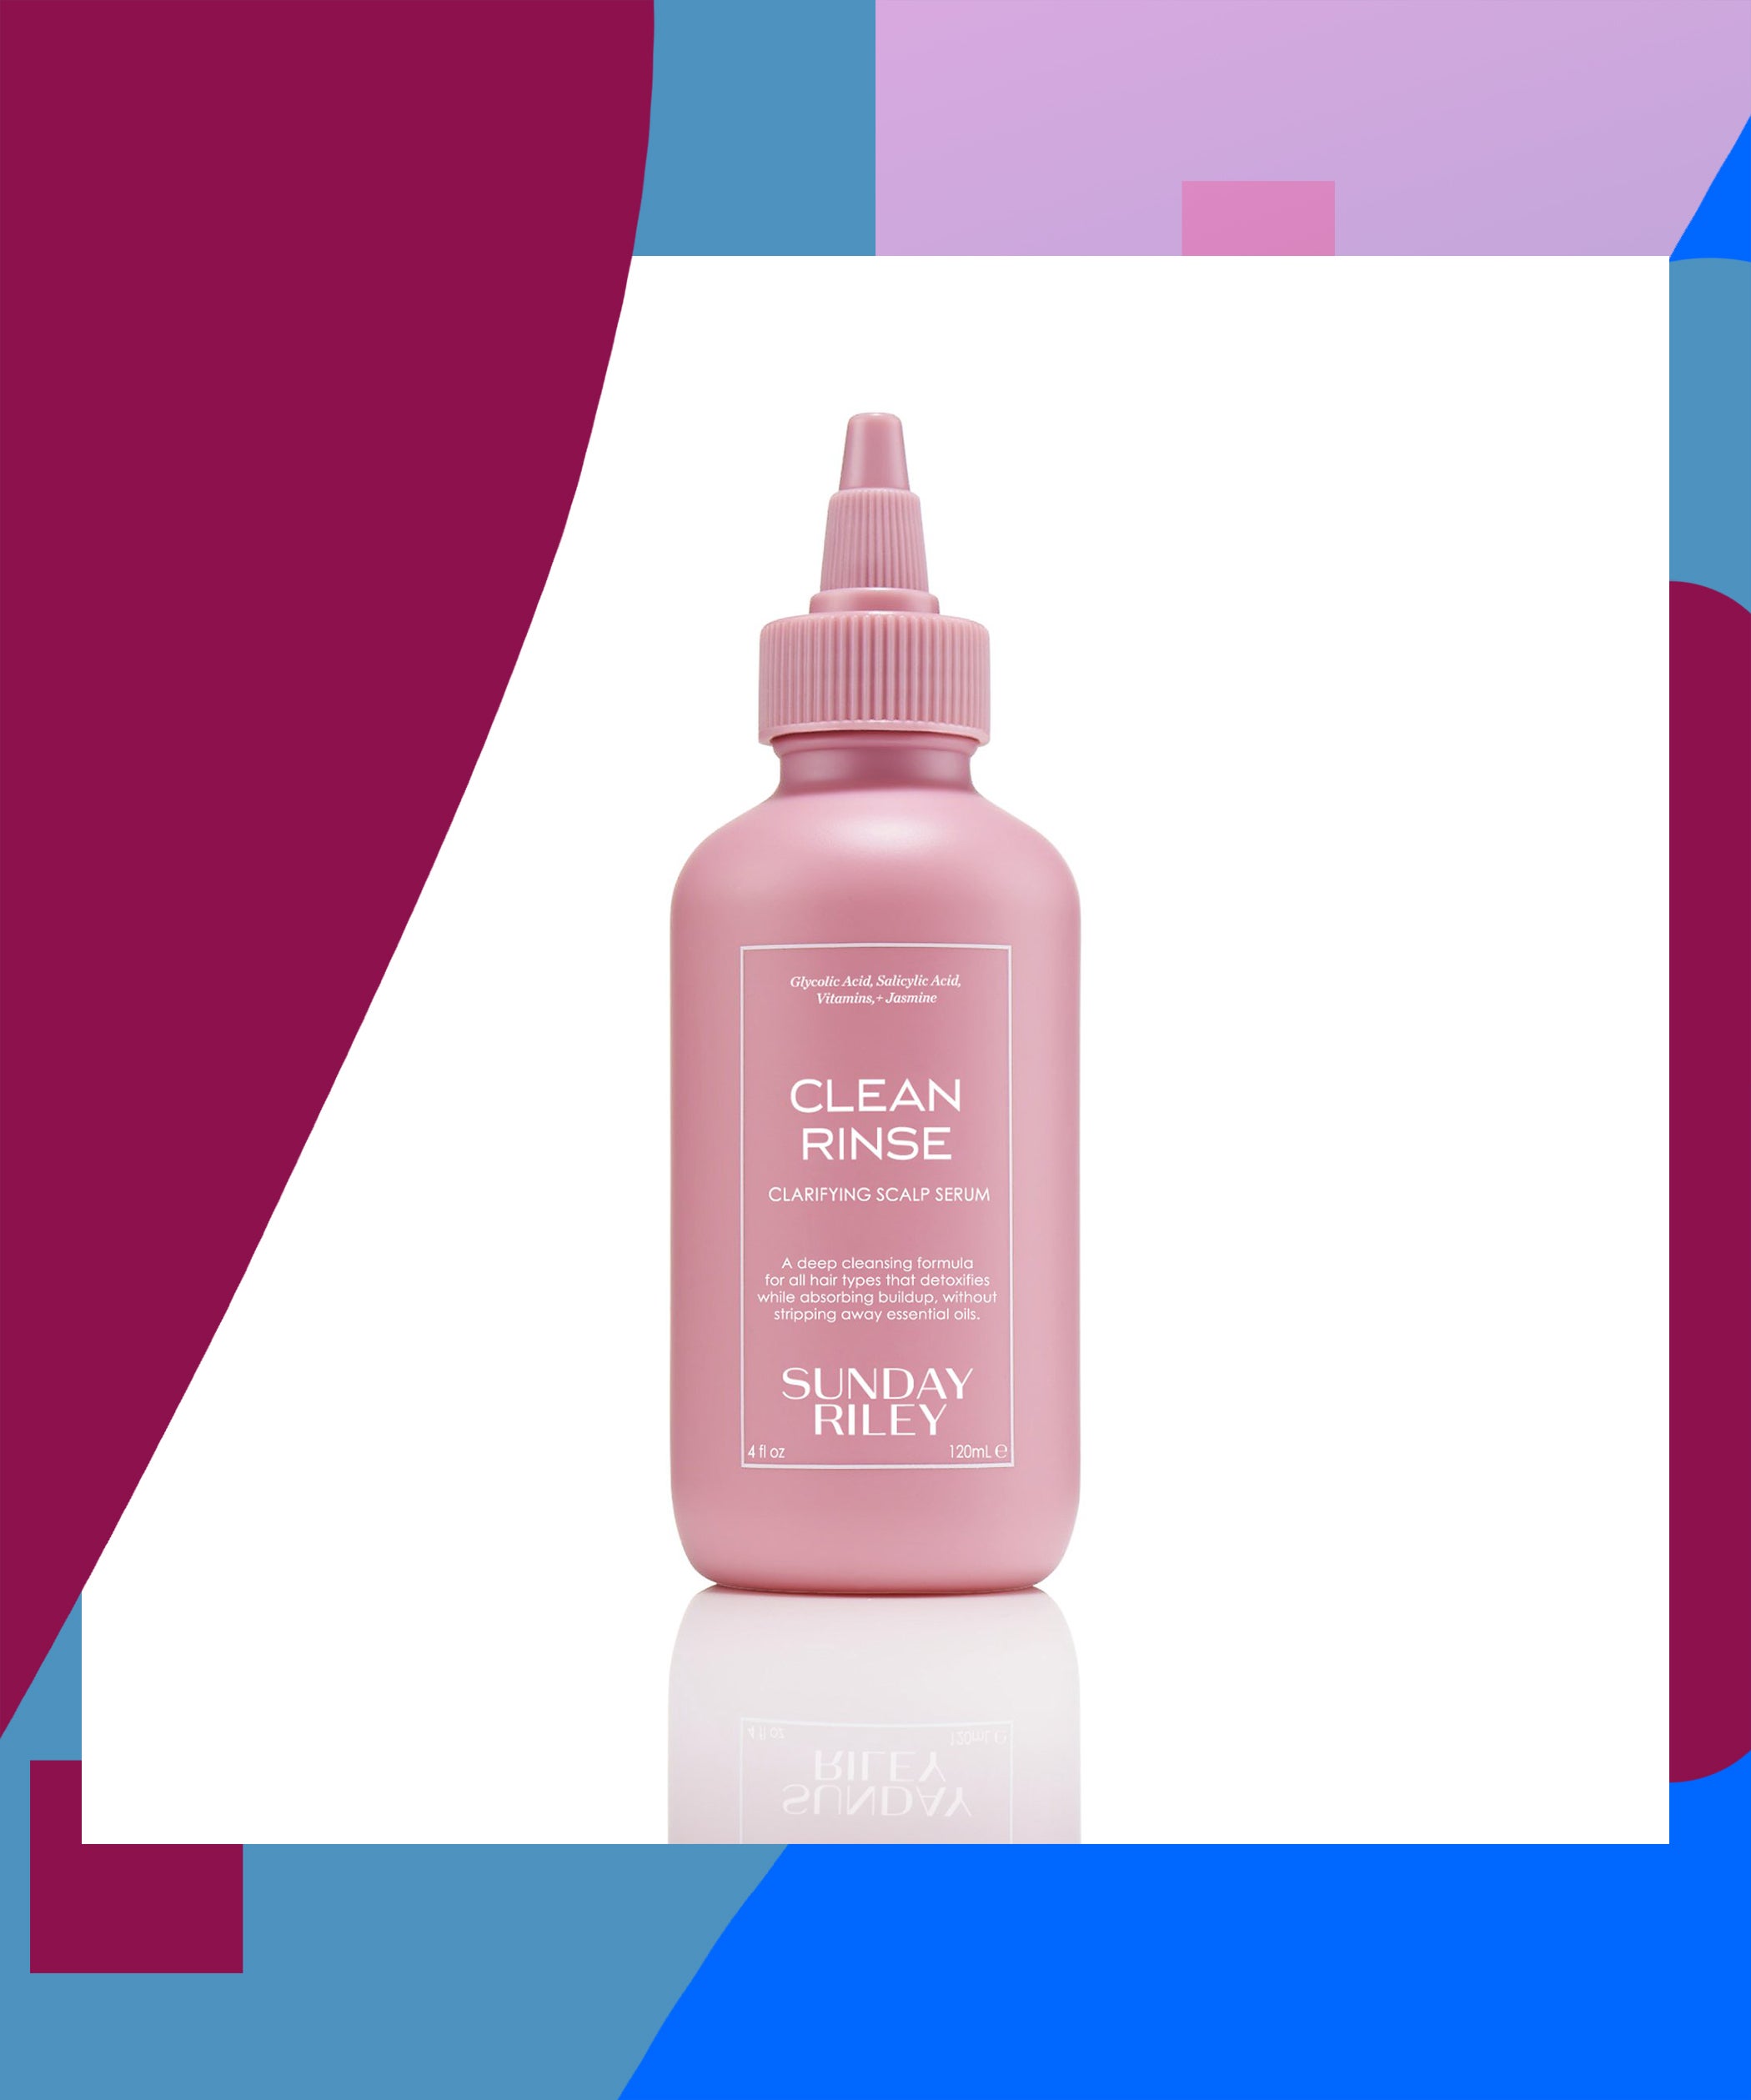 Sunday Riley Launches Clean Rinse Scalp Serum For Hair